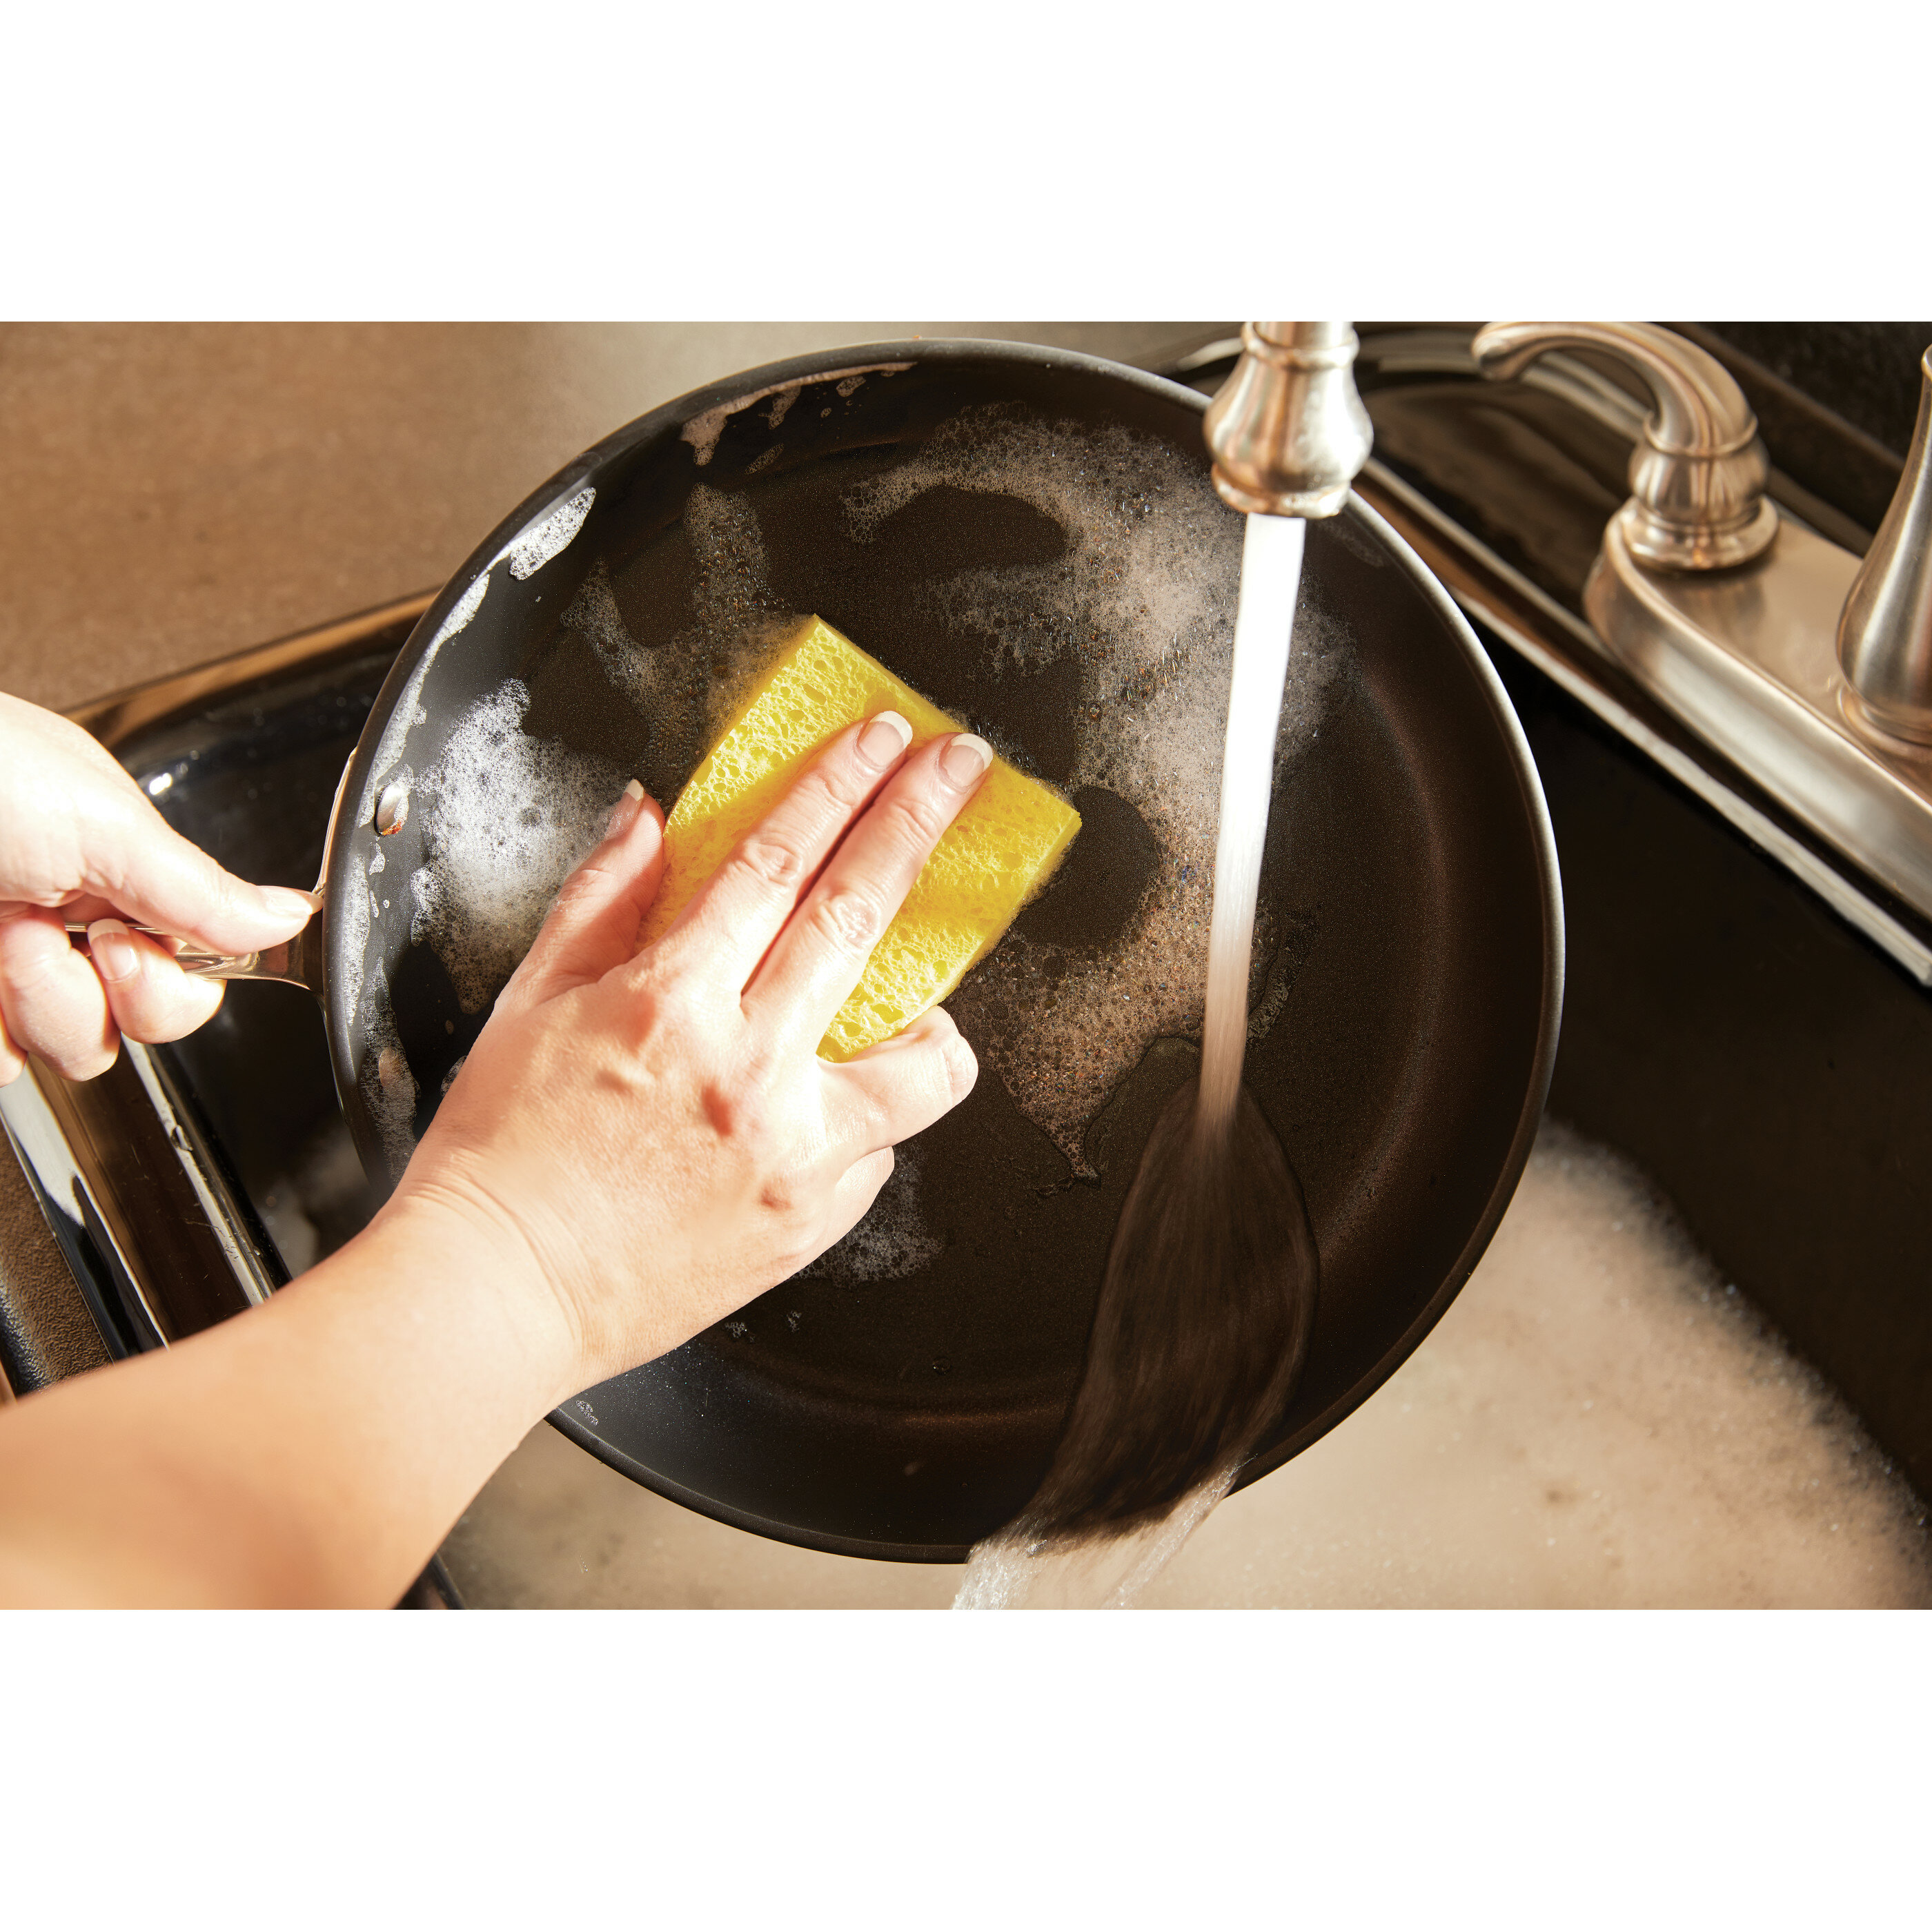 All-Clad Ha1™ Non-Stick Hard-Anodized Aluminum Saucepan with Lid & Reviews